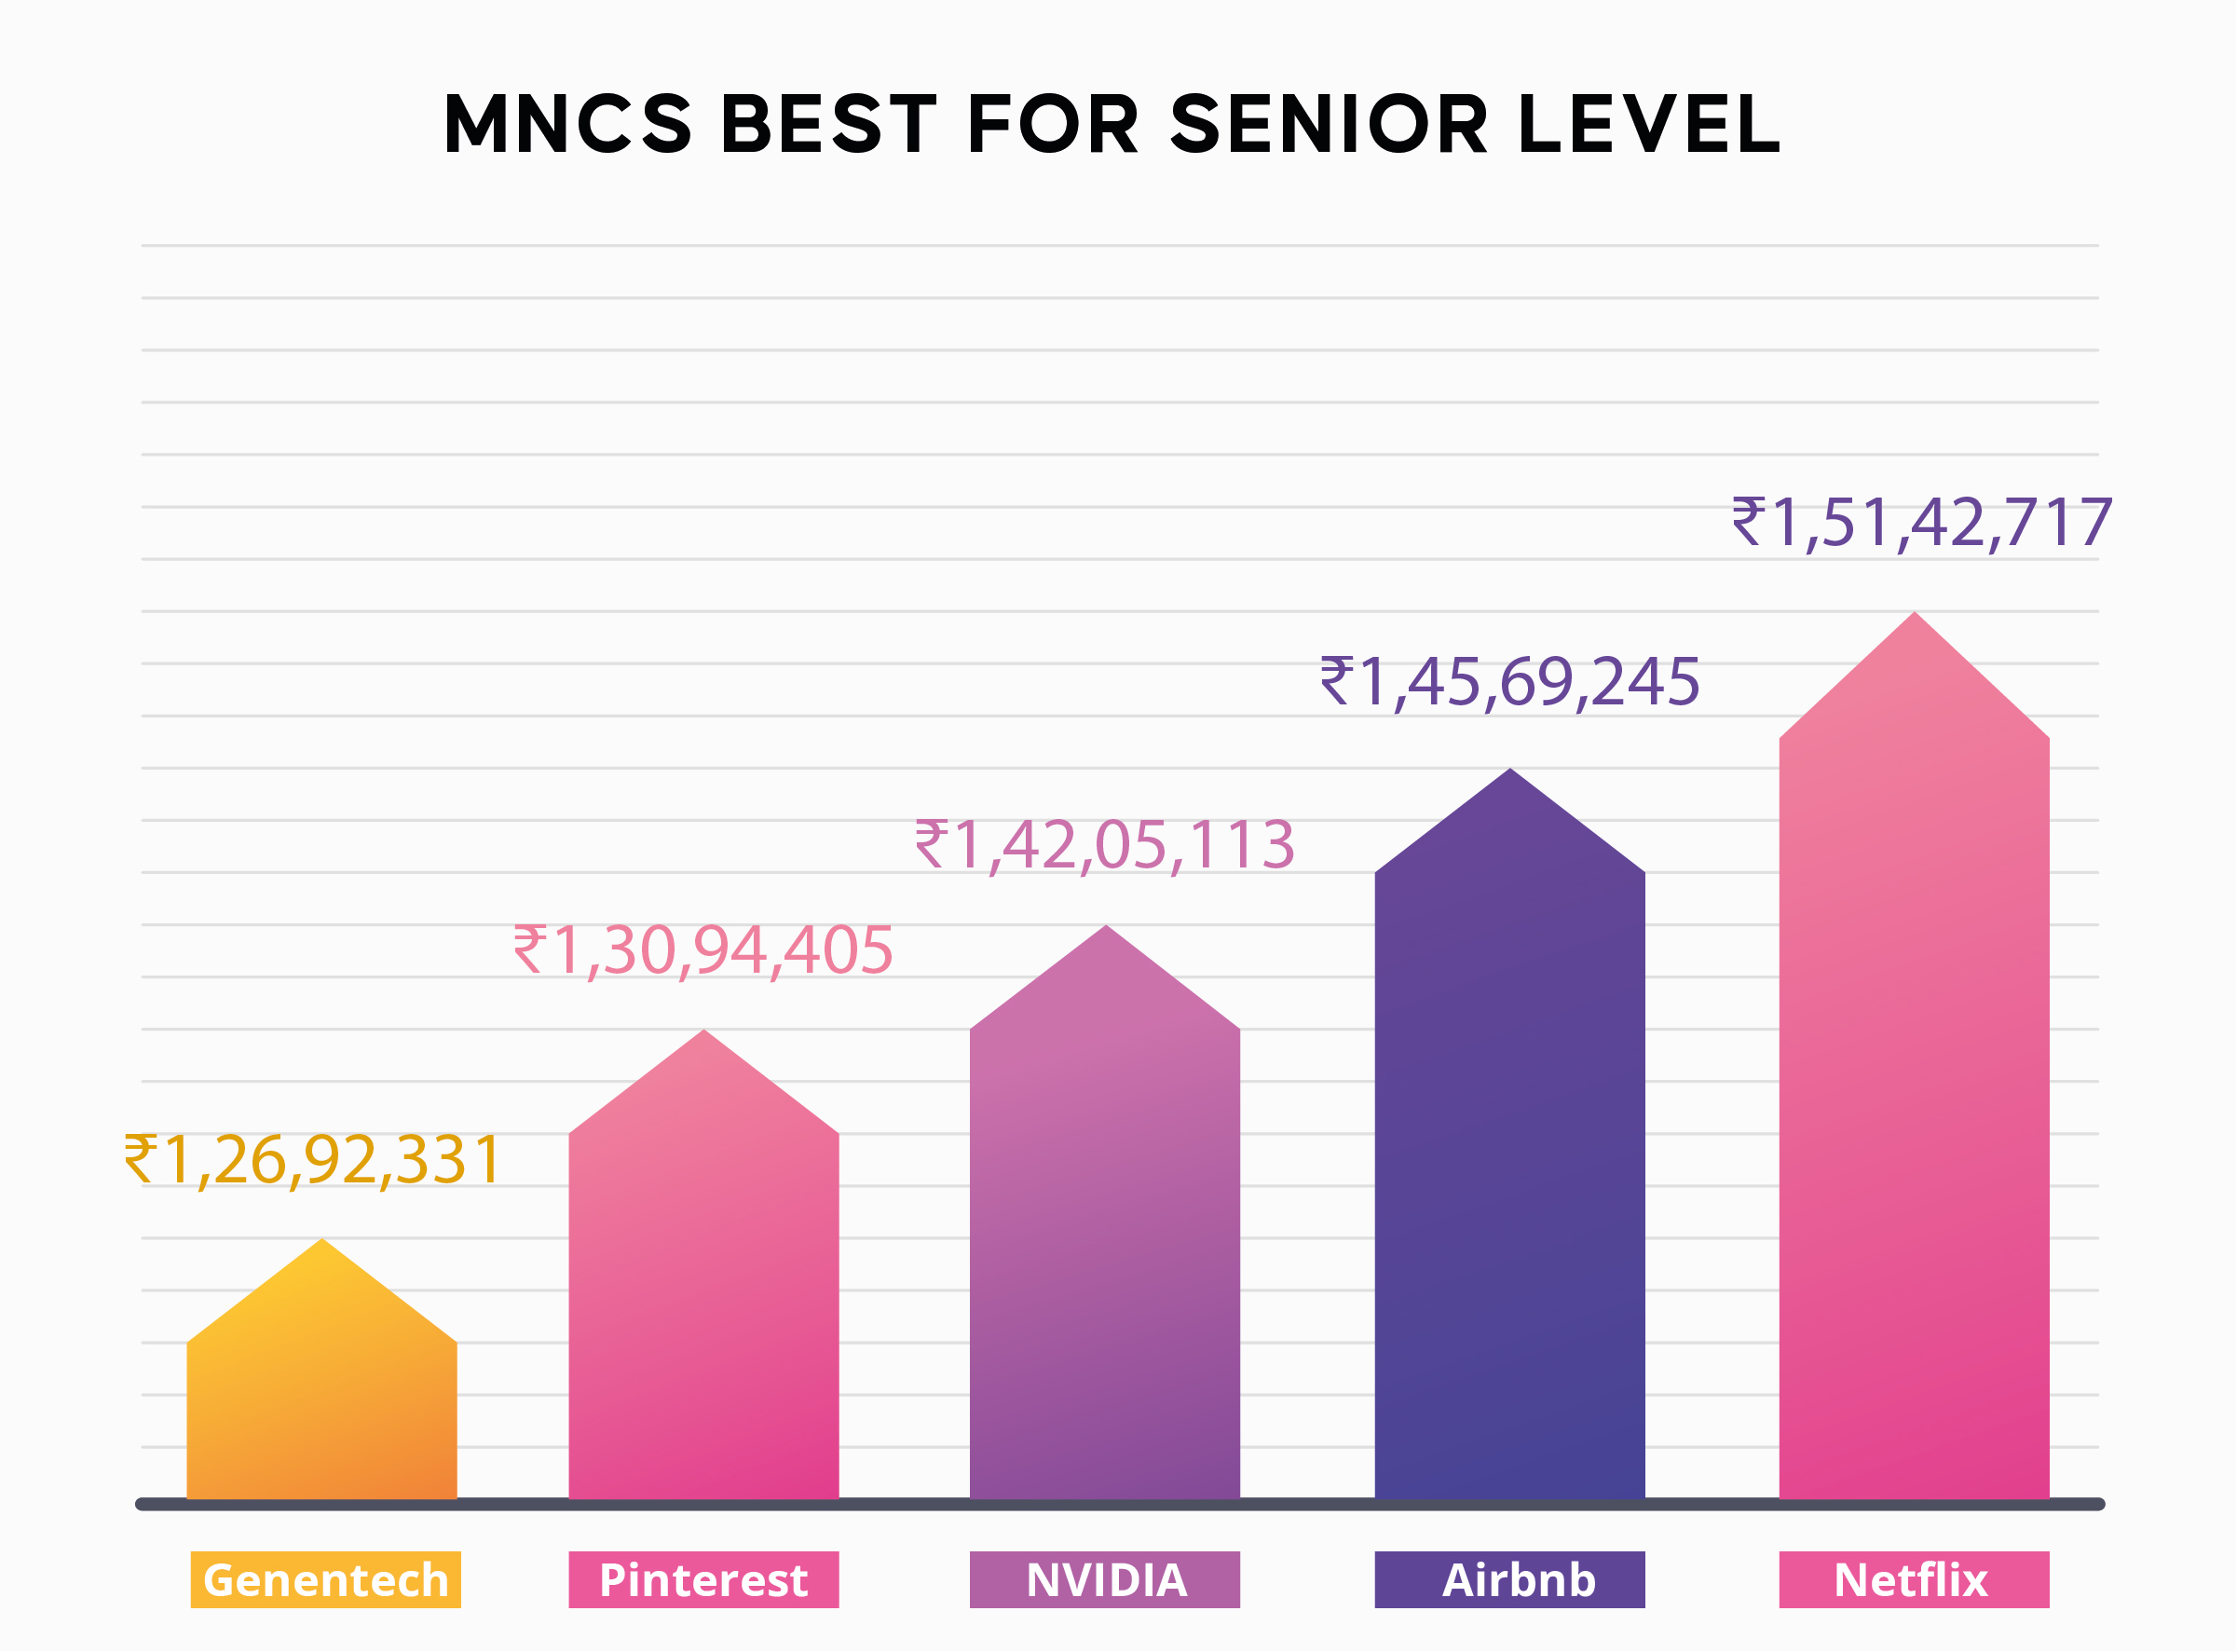 A bar graph titled, 'MNCS BEST FOR SENIOR LEVEL' list of best MNCs for senior-level Data Scientists. The Data are as follows in(decreasing order) :
Netflix: 1,51,42,717 Indian Rupees
Airbnb: 1,45,69,245 Indian Rupees
NVIDIA: 1,42,05,113 Indian Rupees
Pinterest: 1,30,94,405 Indian Rupees
Genentech: 1,26,92,331 Indian Rupees